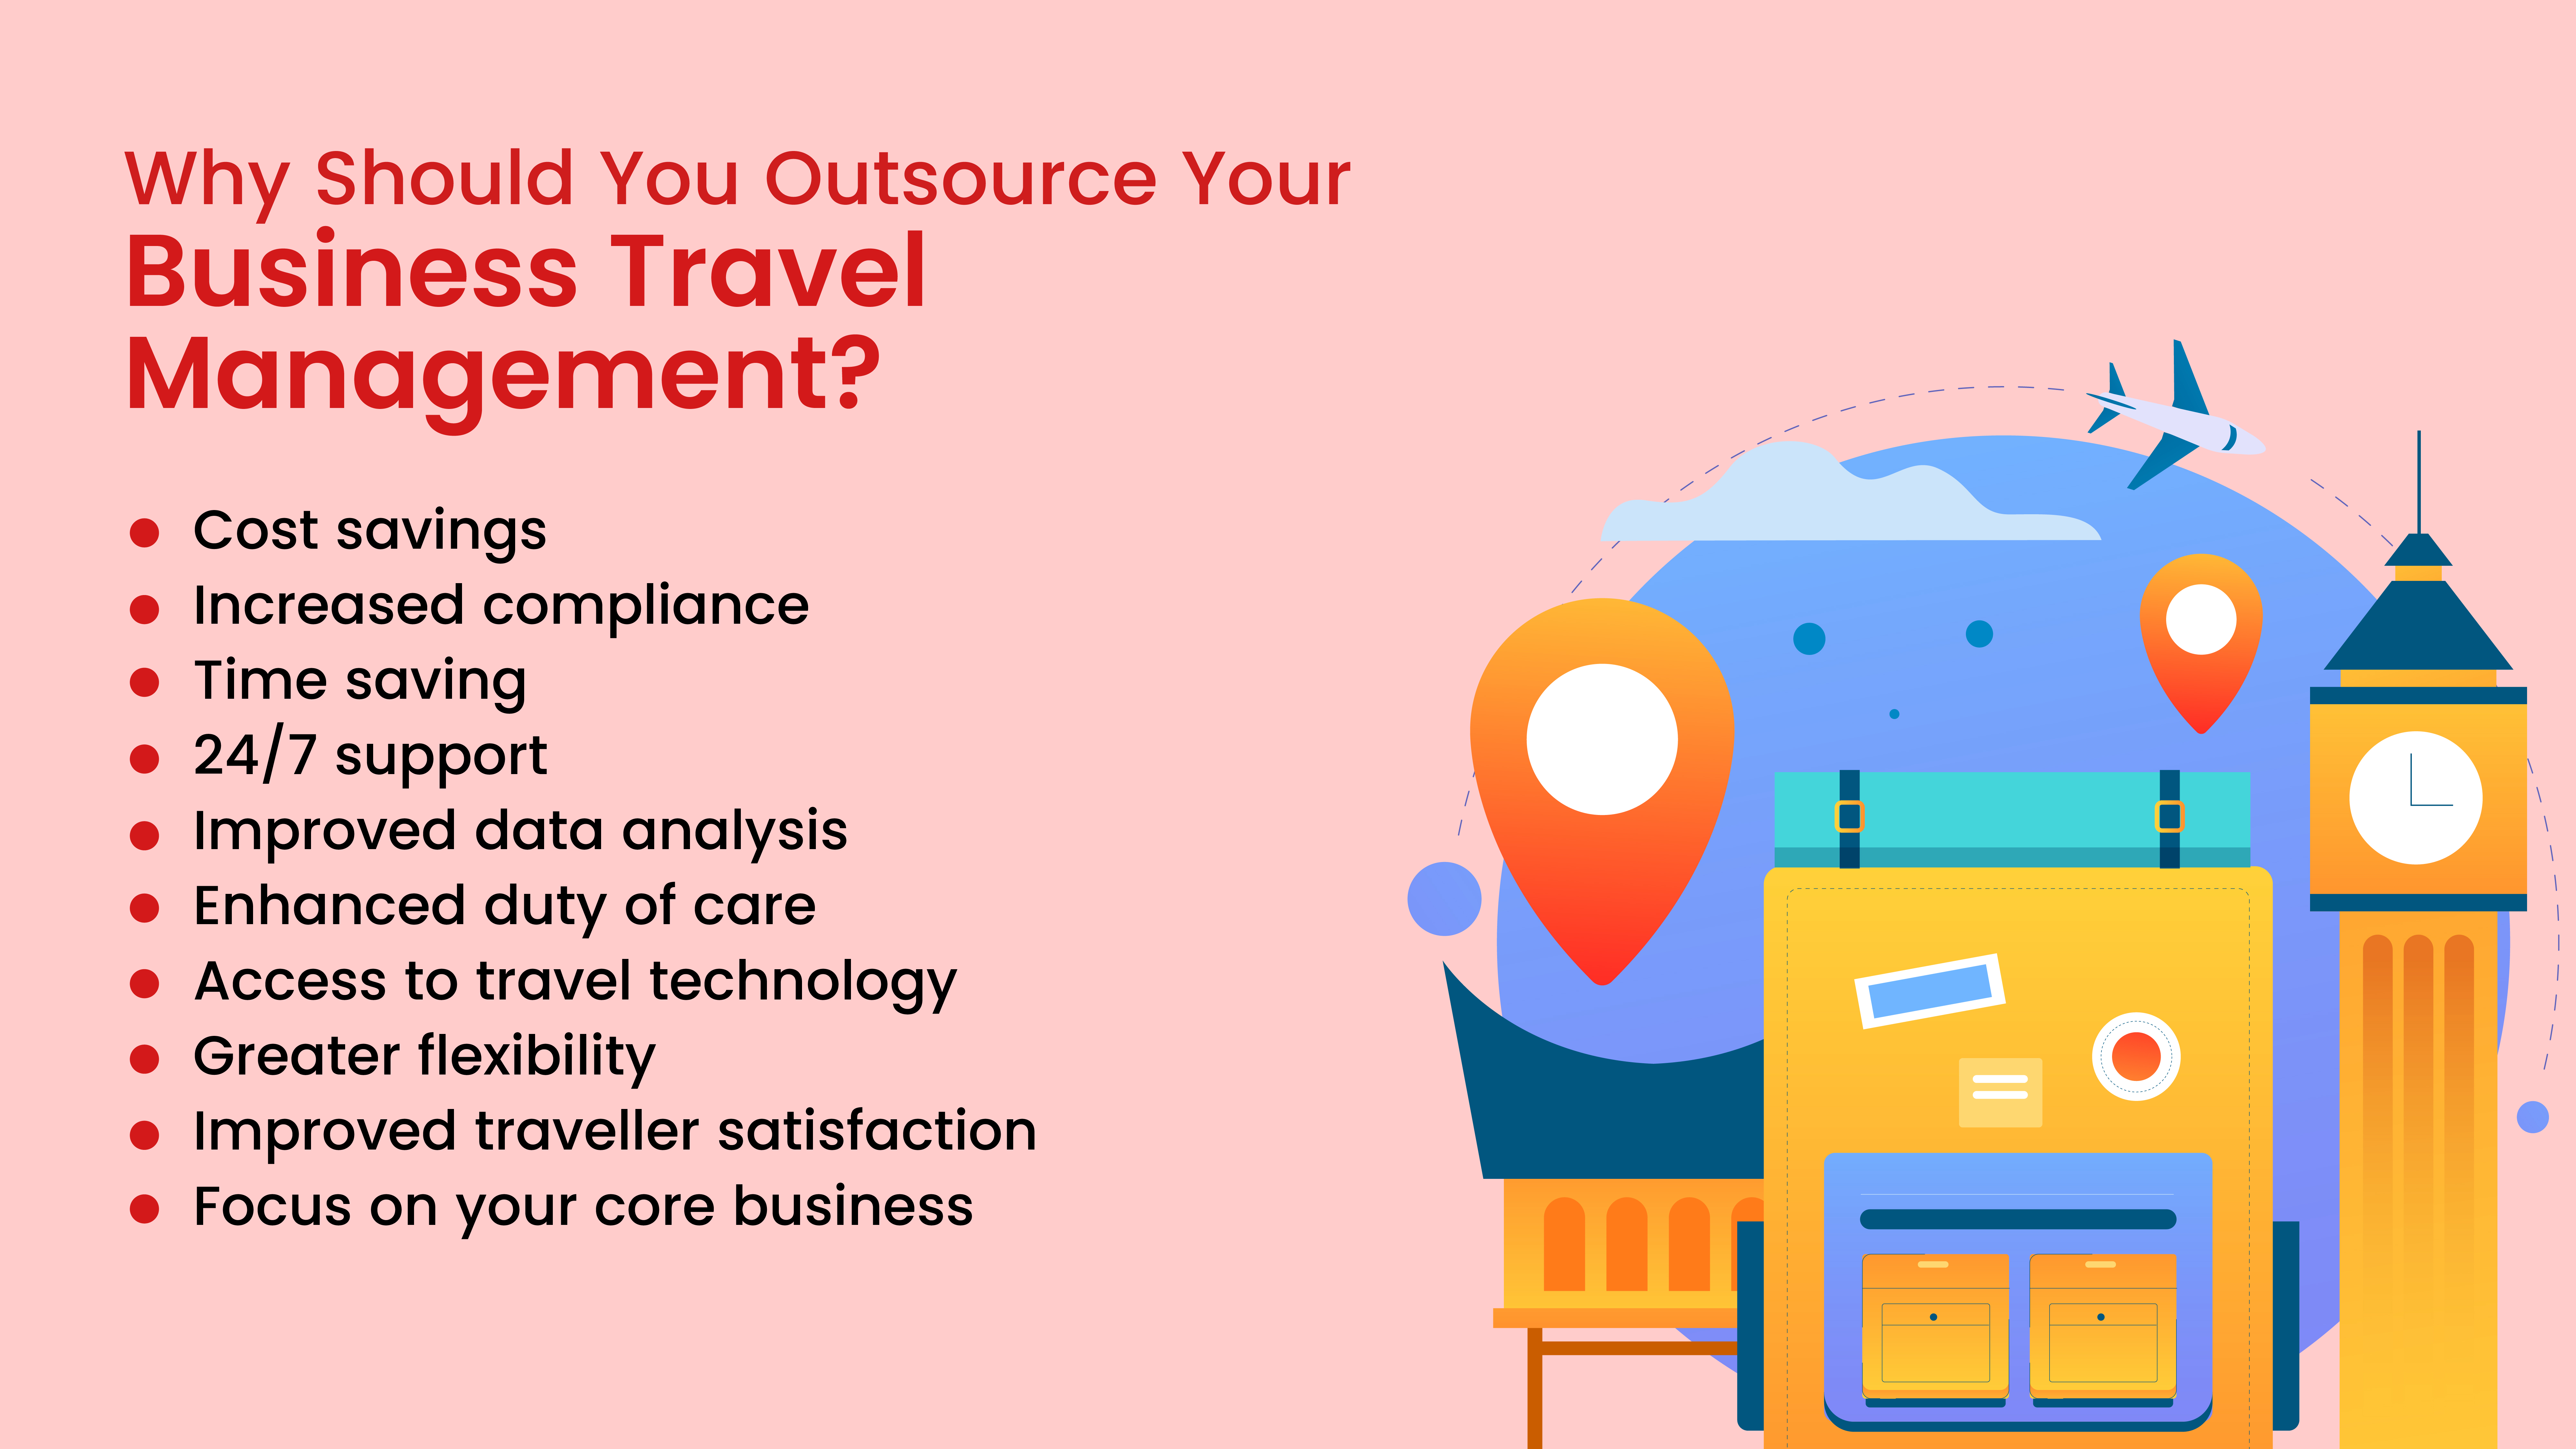 Why Outsource Your Business Travel Management: 10 Benefits 